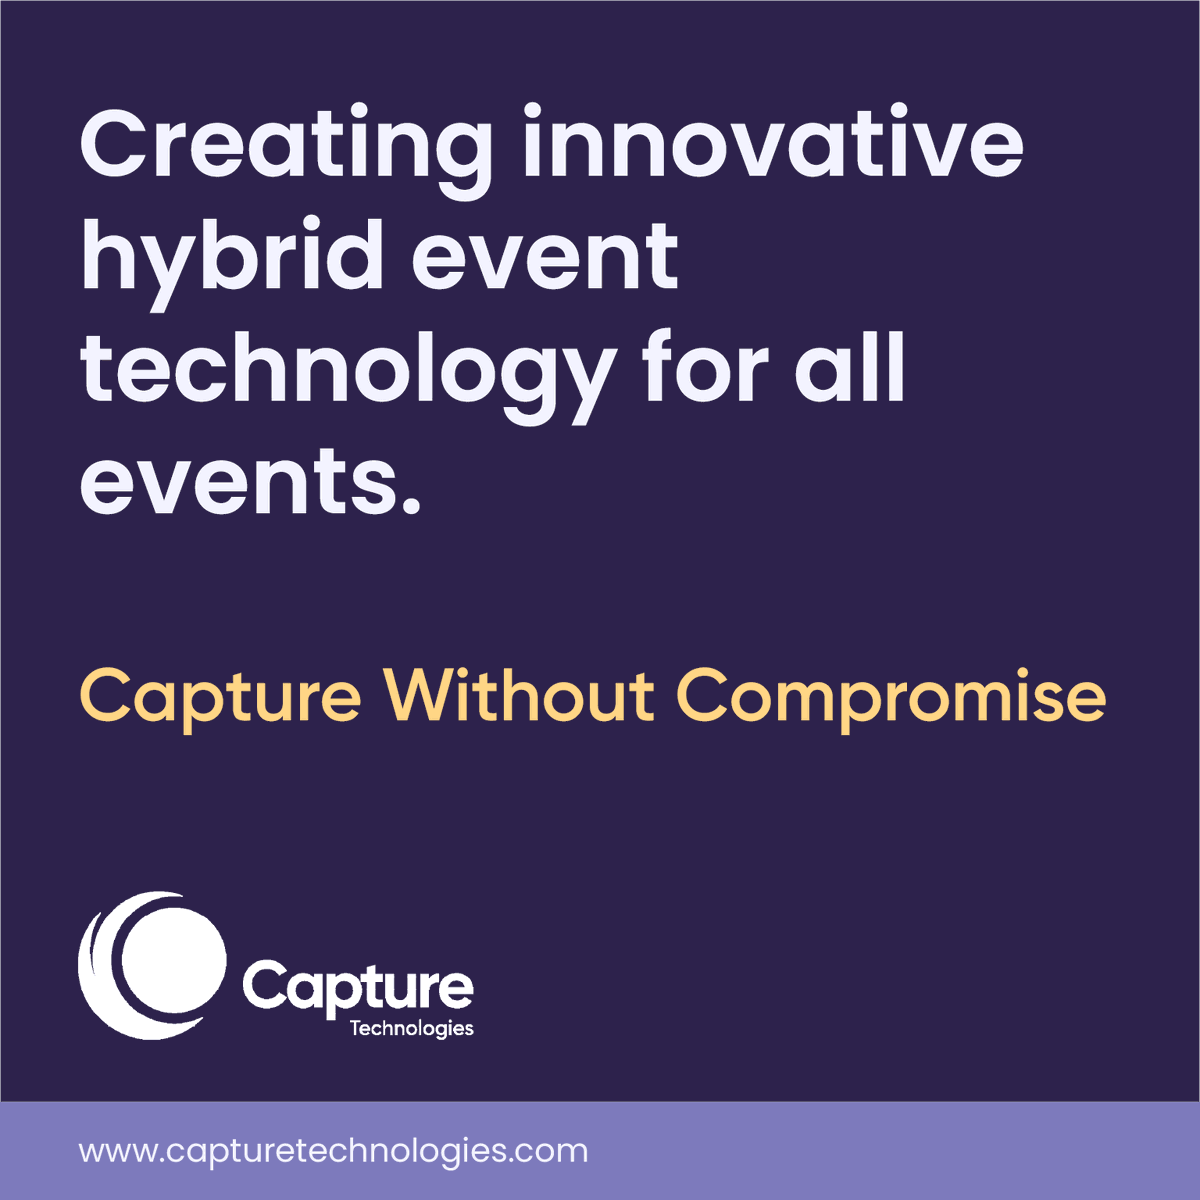 Capture Technologies has strived to perfect the technology necessary to create a seamless event experience.

Link in Bio.

#eventtech #withoutcompromise #badgeprinting #eventprofs #eventplanners #capturetechnologies #meetingsandevents #hybridevents #events